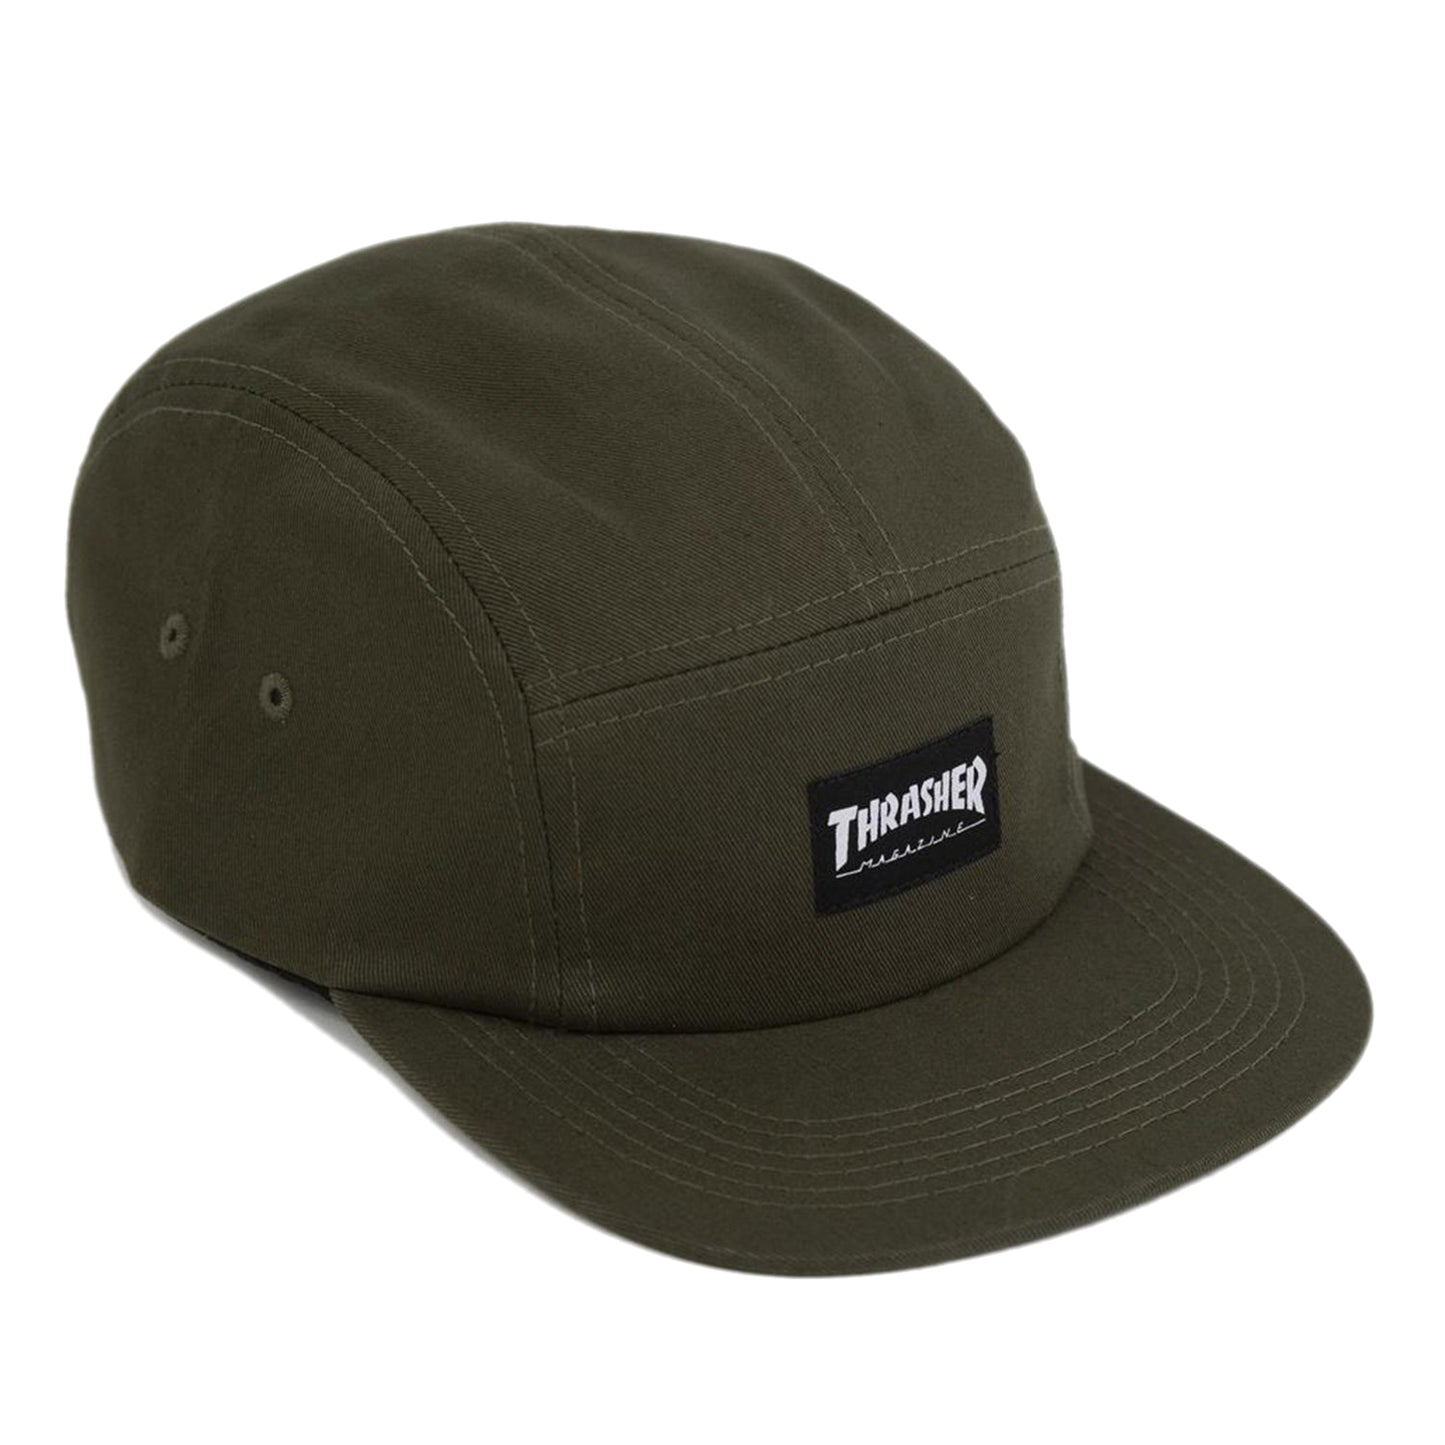 Thrasher 5 Panel Cap - Army - Prime Delux Store